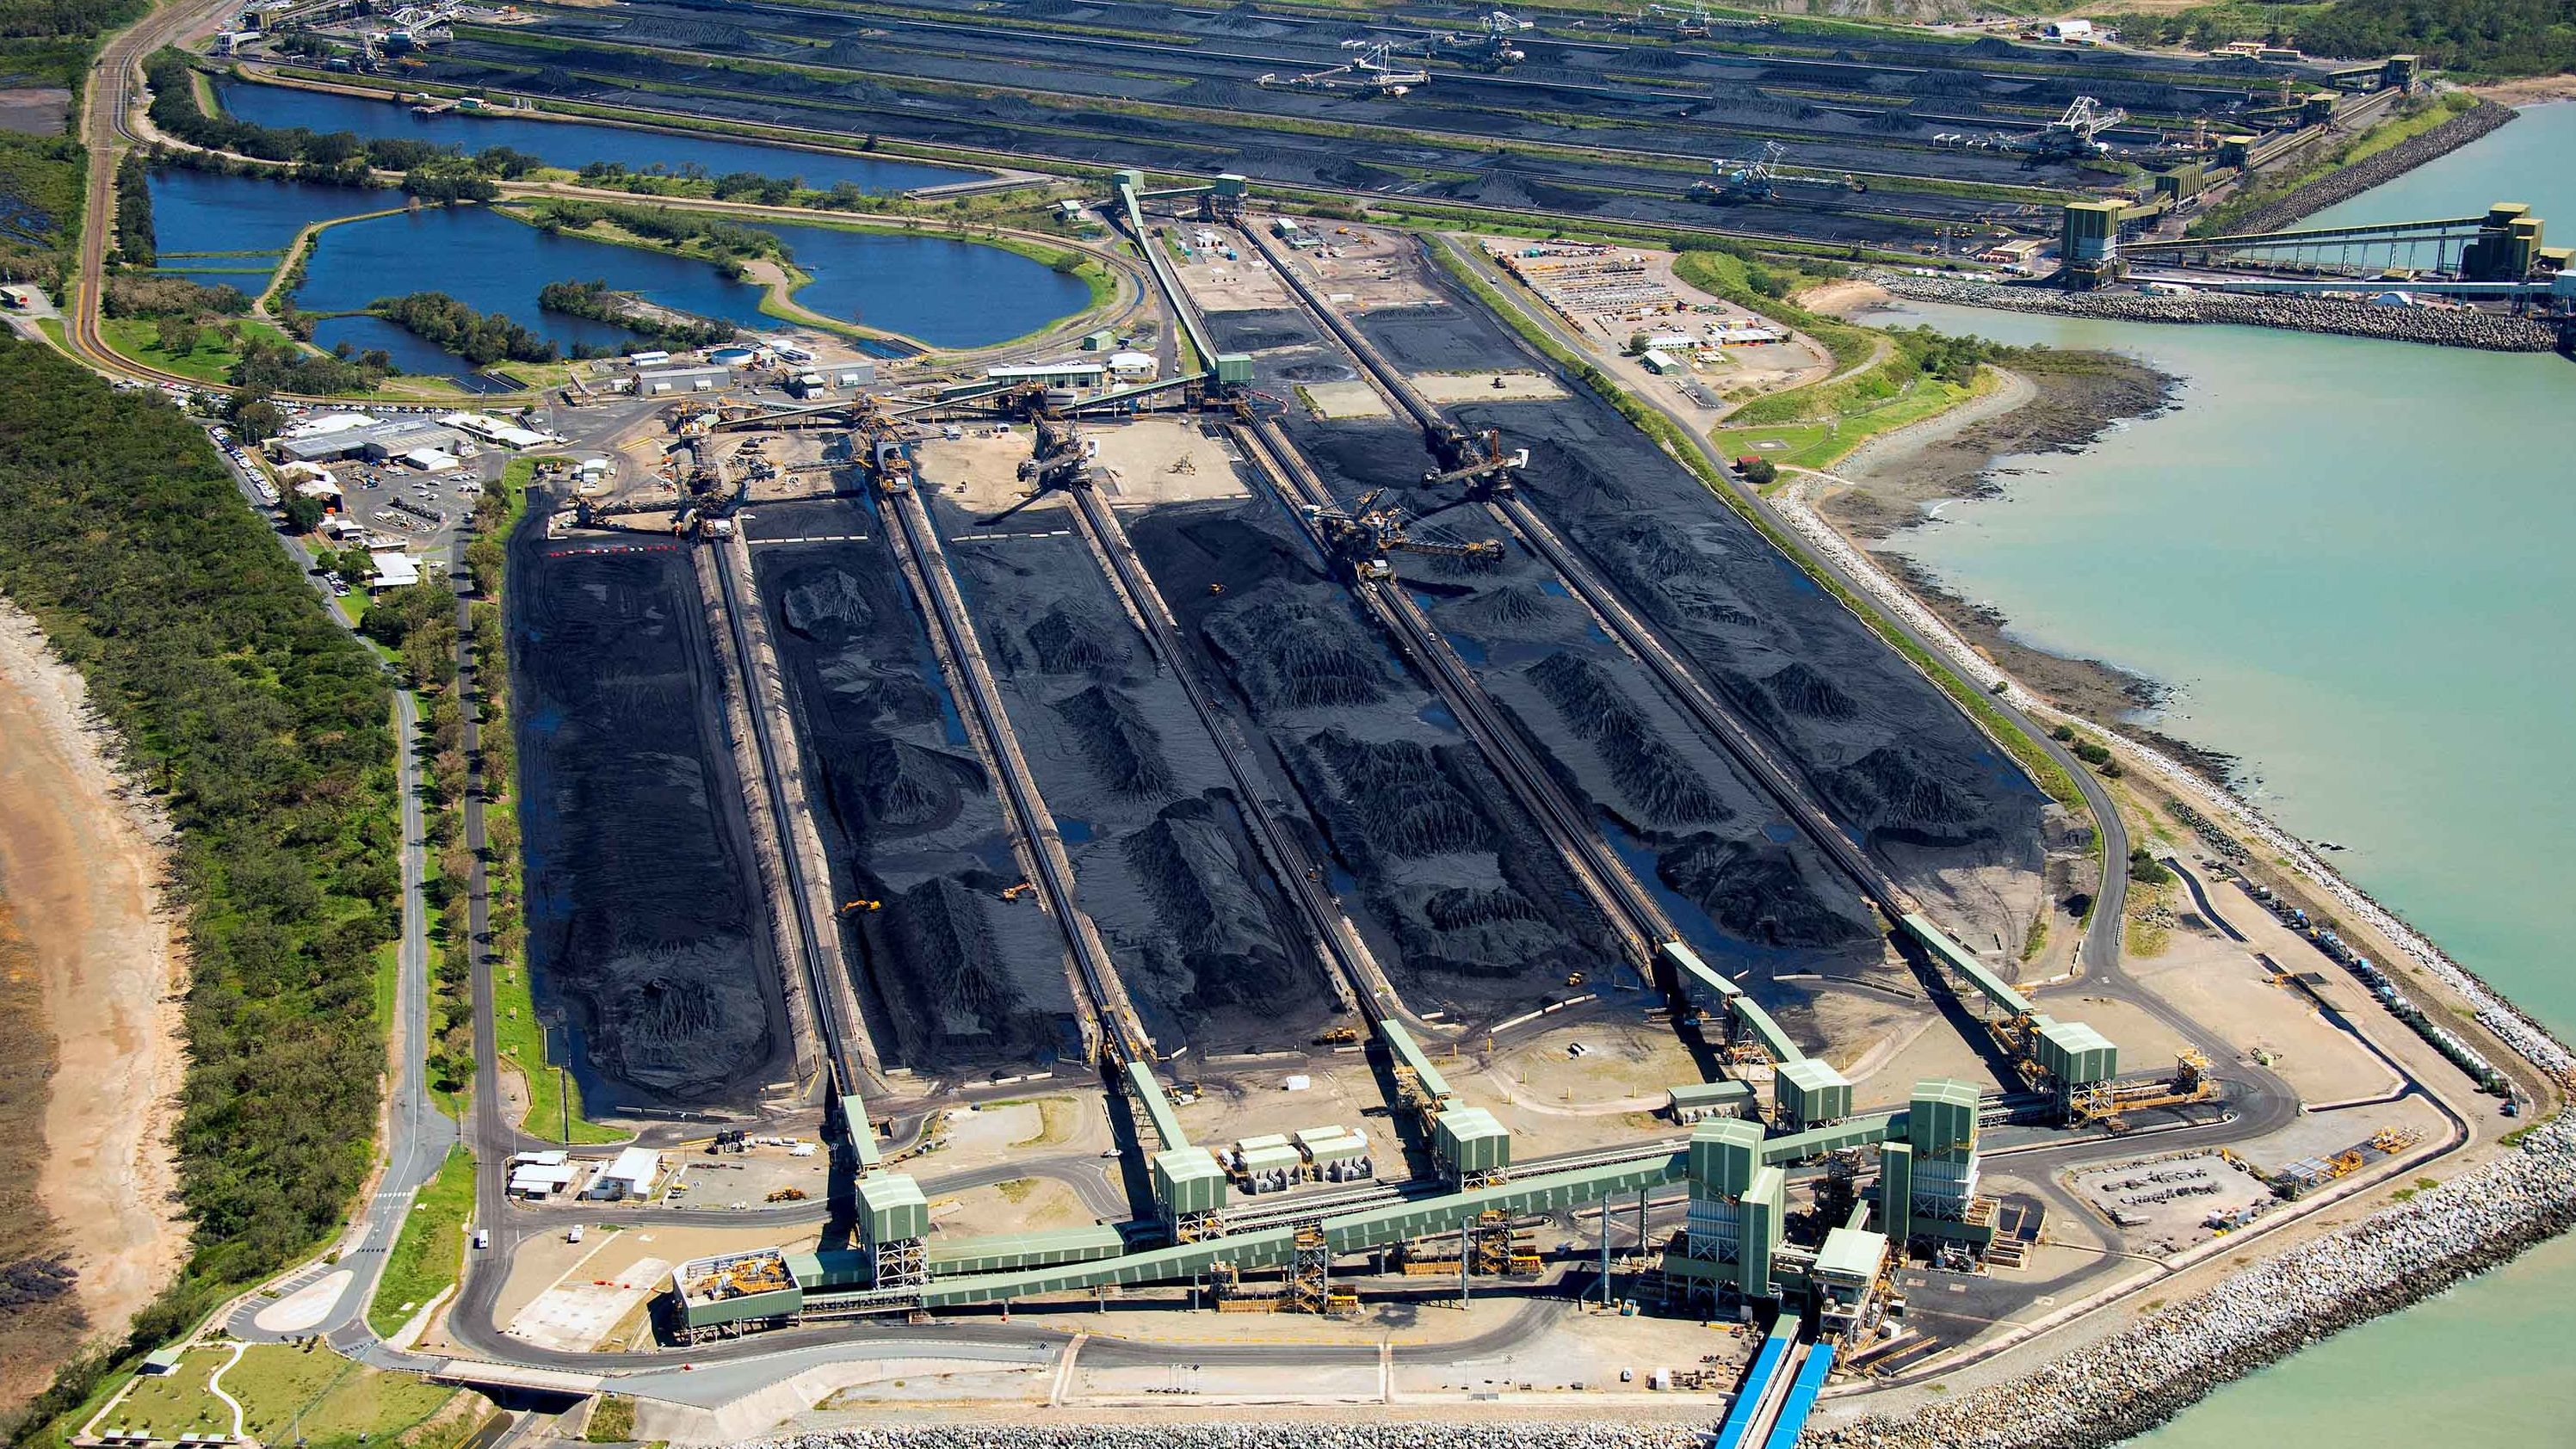 Coal sits at the Hay Point and Dalrymple Bay Coal Terminals south of the Queensland town of Mackay in Australia.